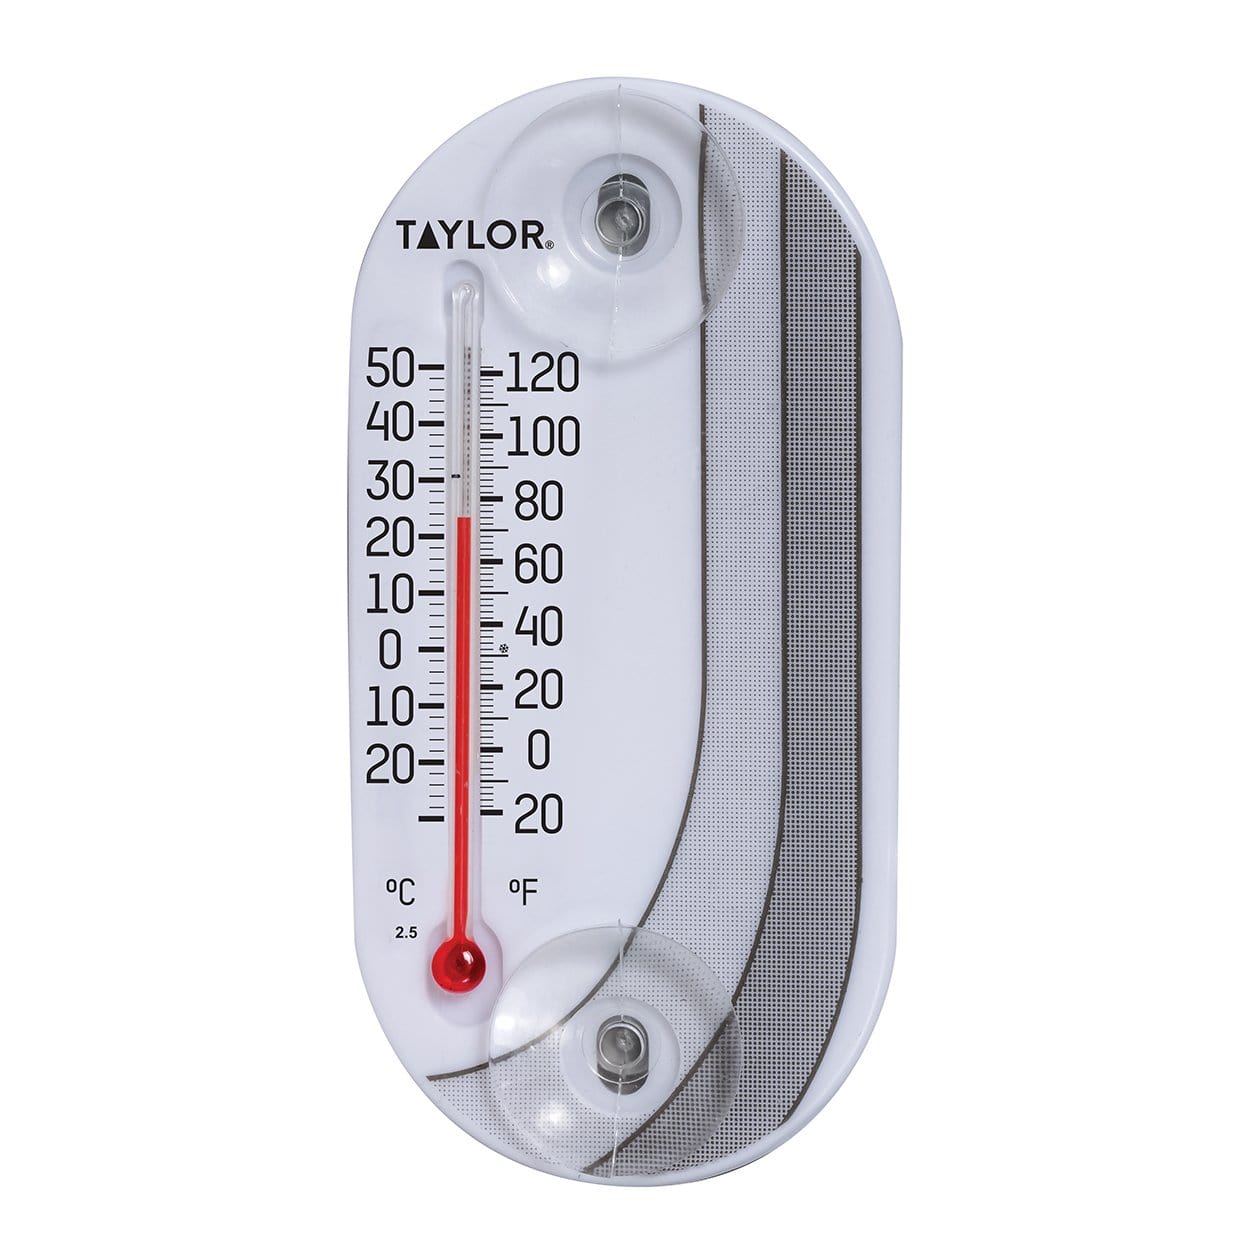 Taylor Window Thermometer